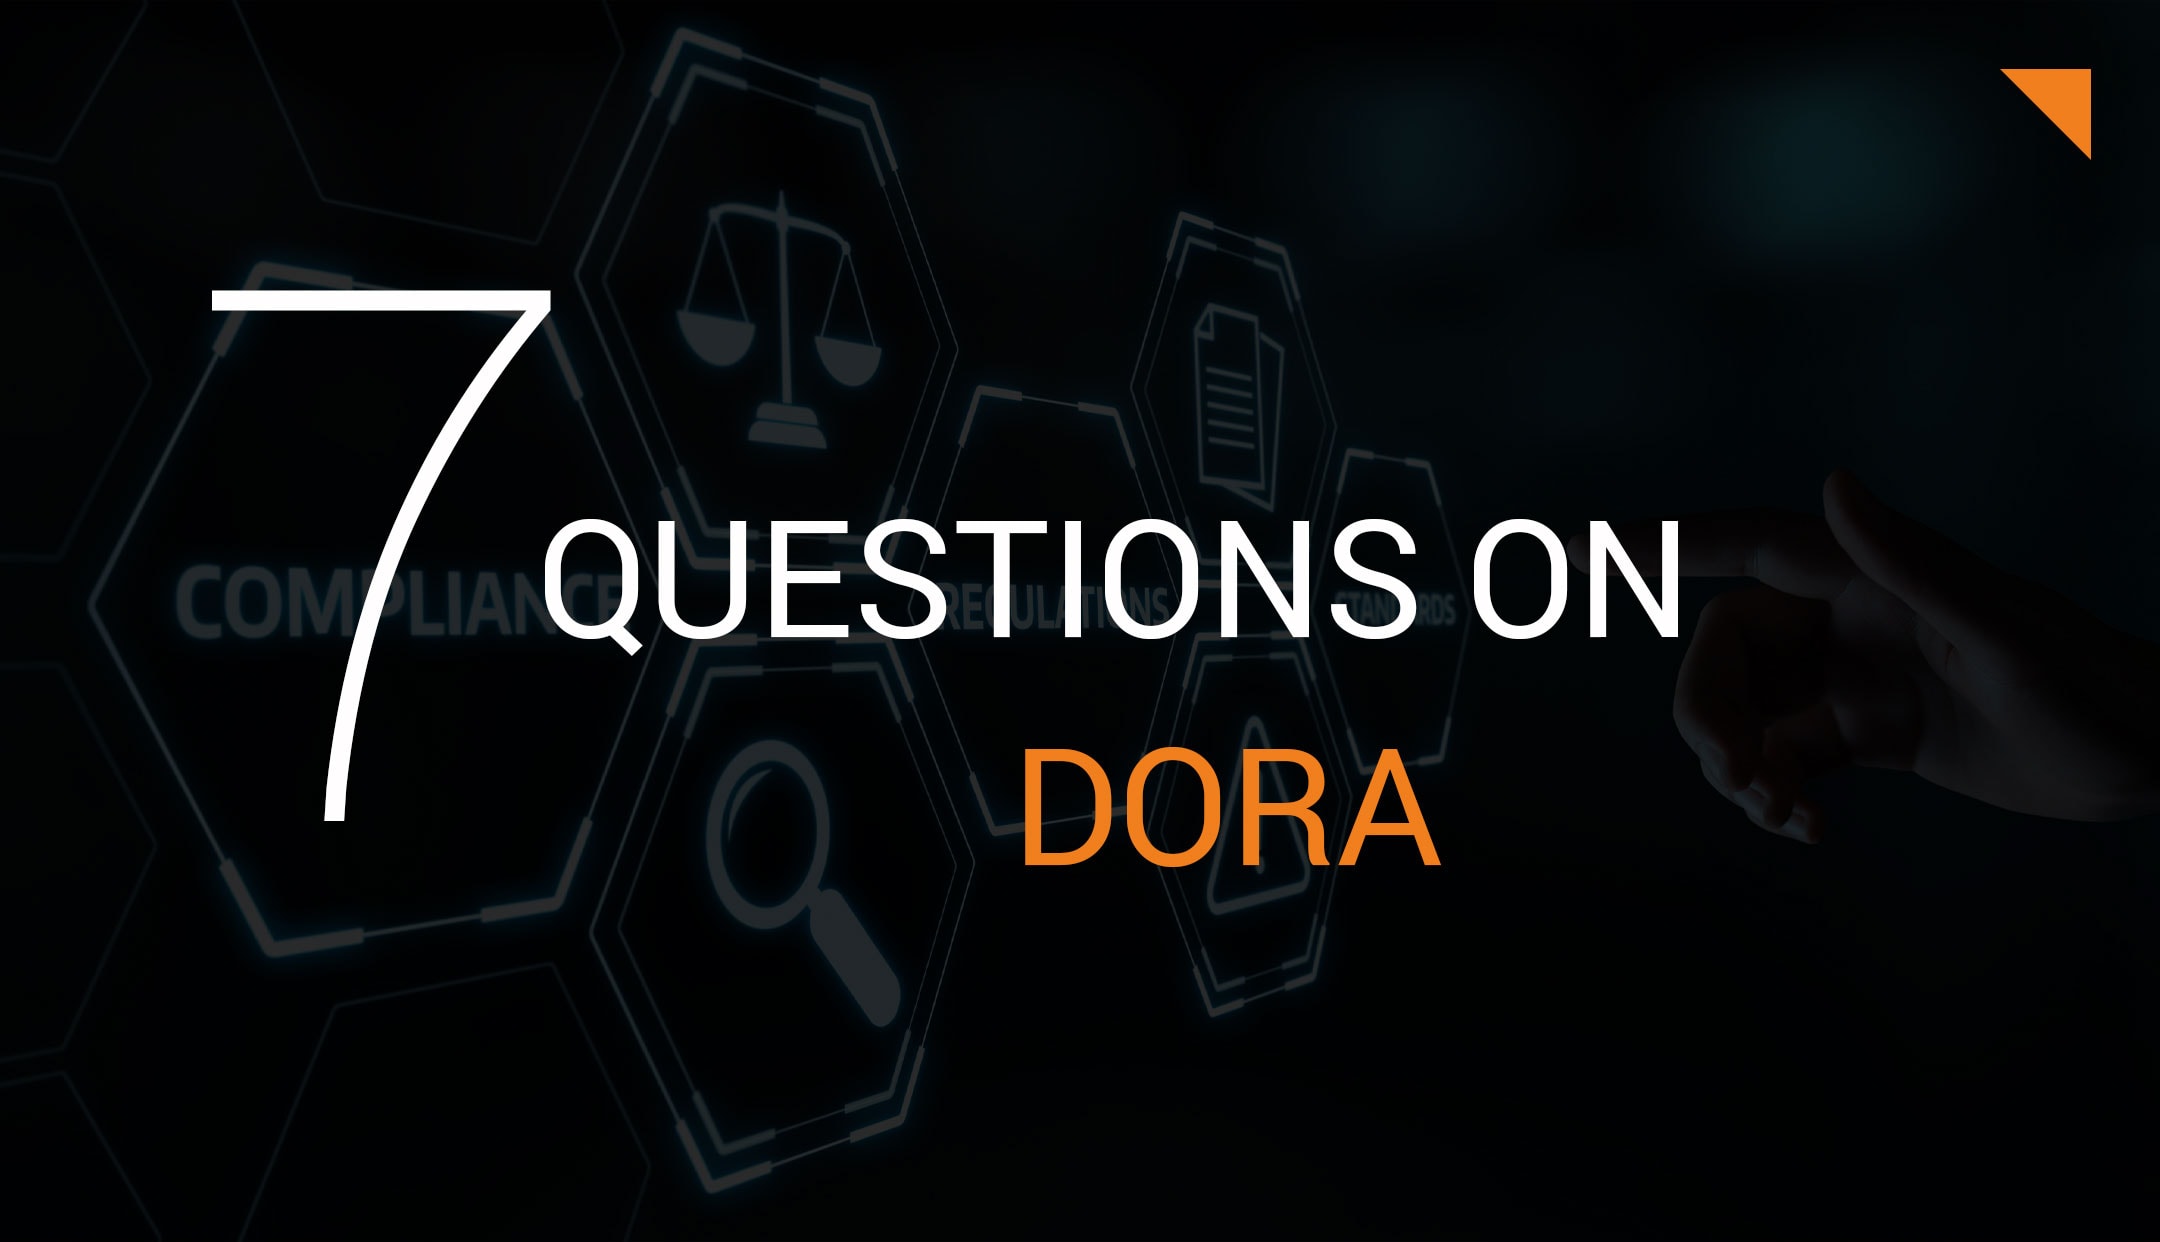 Digital Operational Resilience Act (DORA): The 7 Most Important Questions